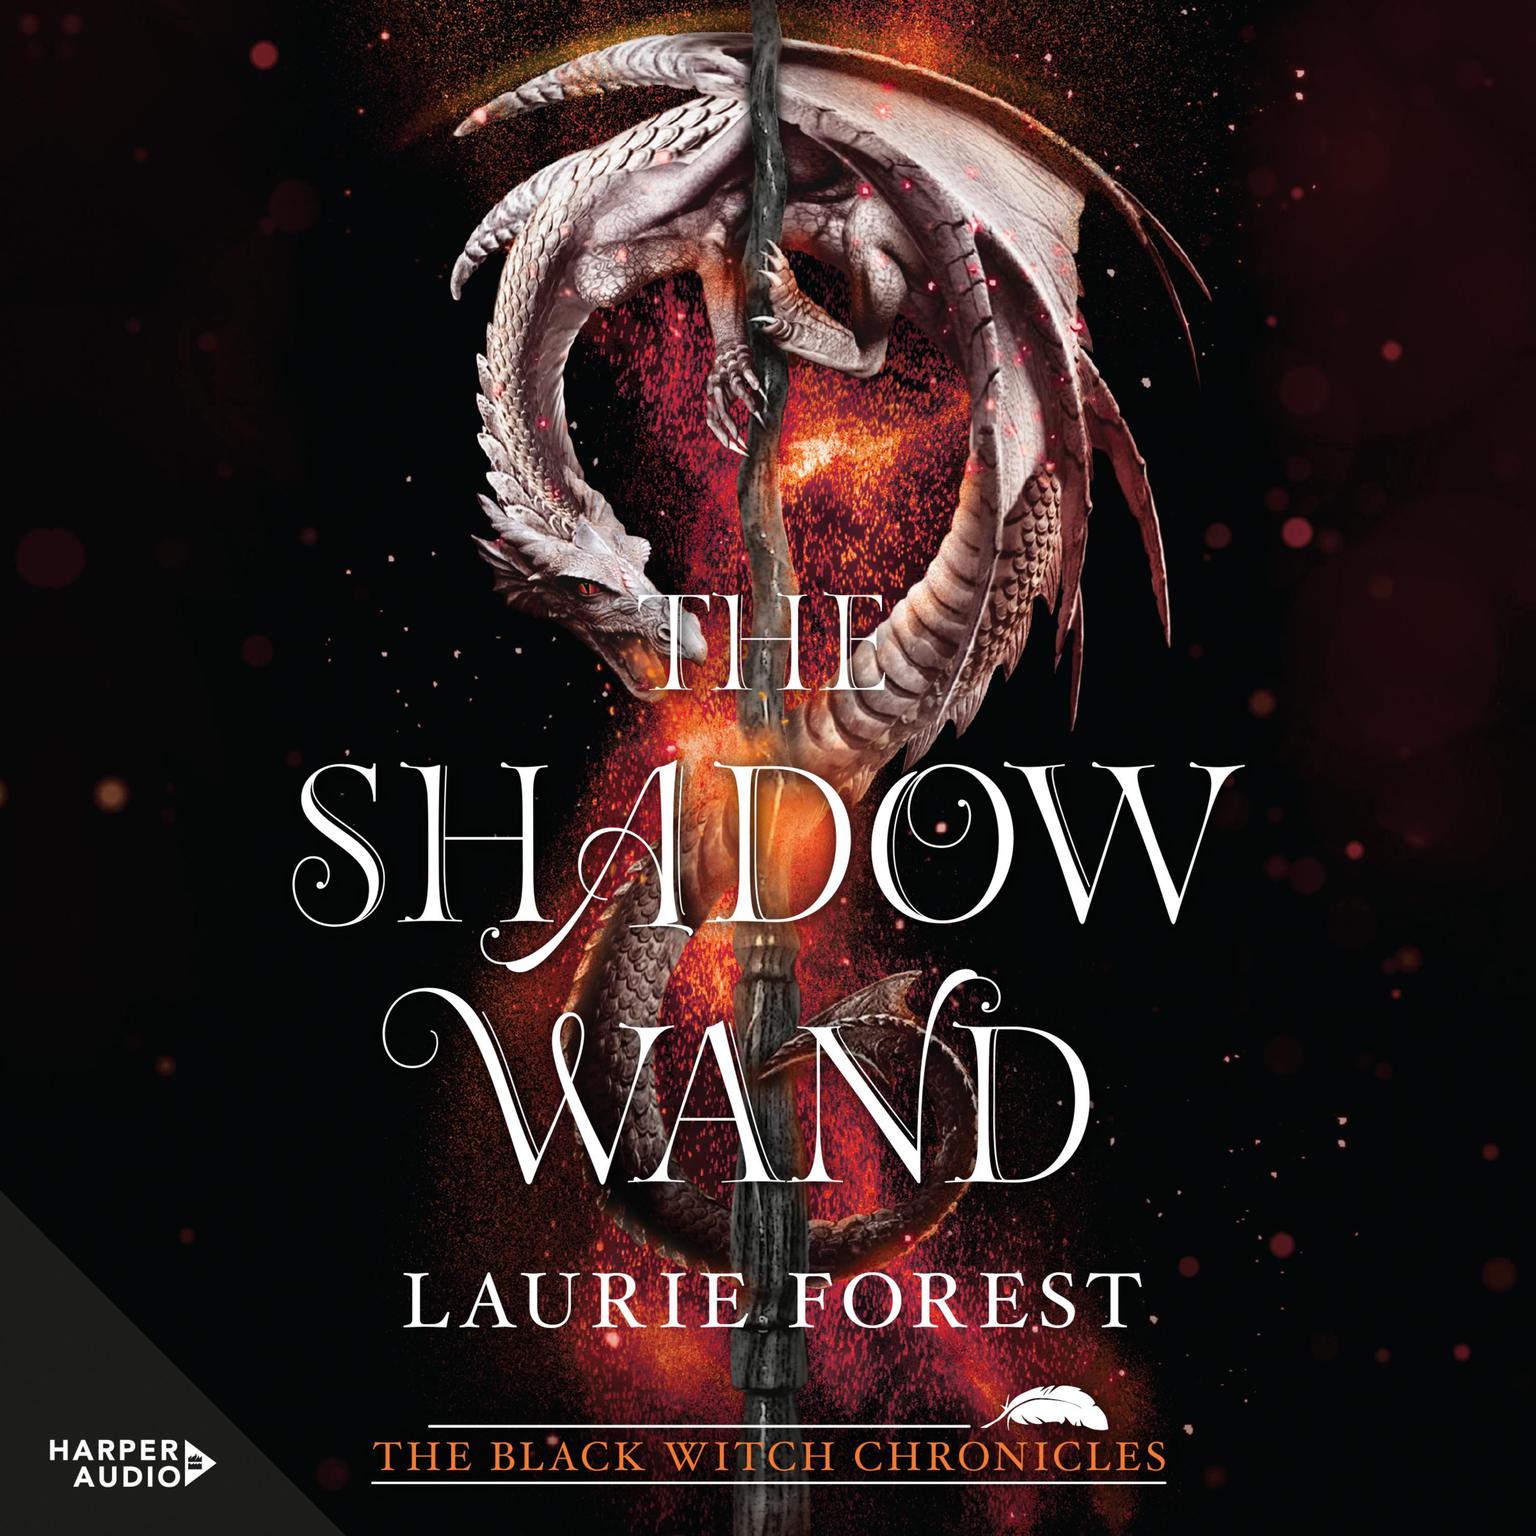 The Shadow Wand Audiobook, by Laurie Forest